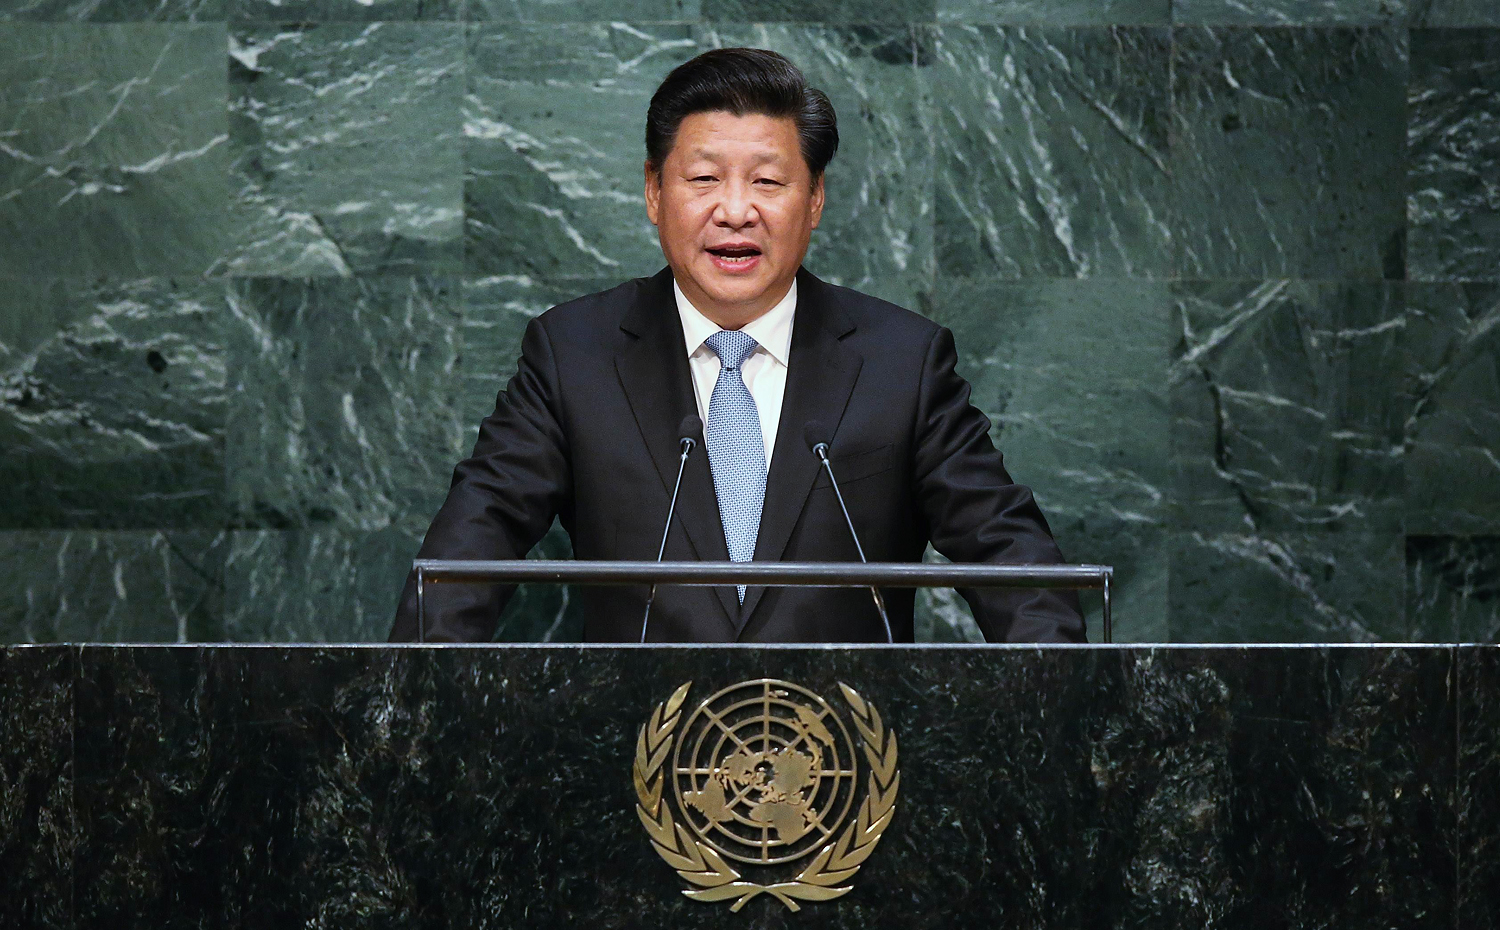 President Xi Jinping addresses the 70th session of the United Nations General Assembly on Monday. Photo: AFP